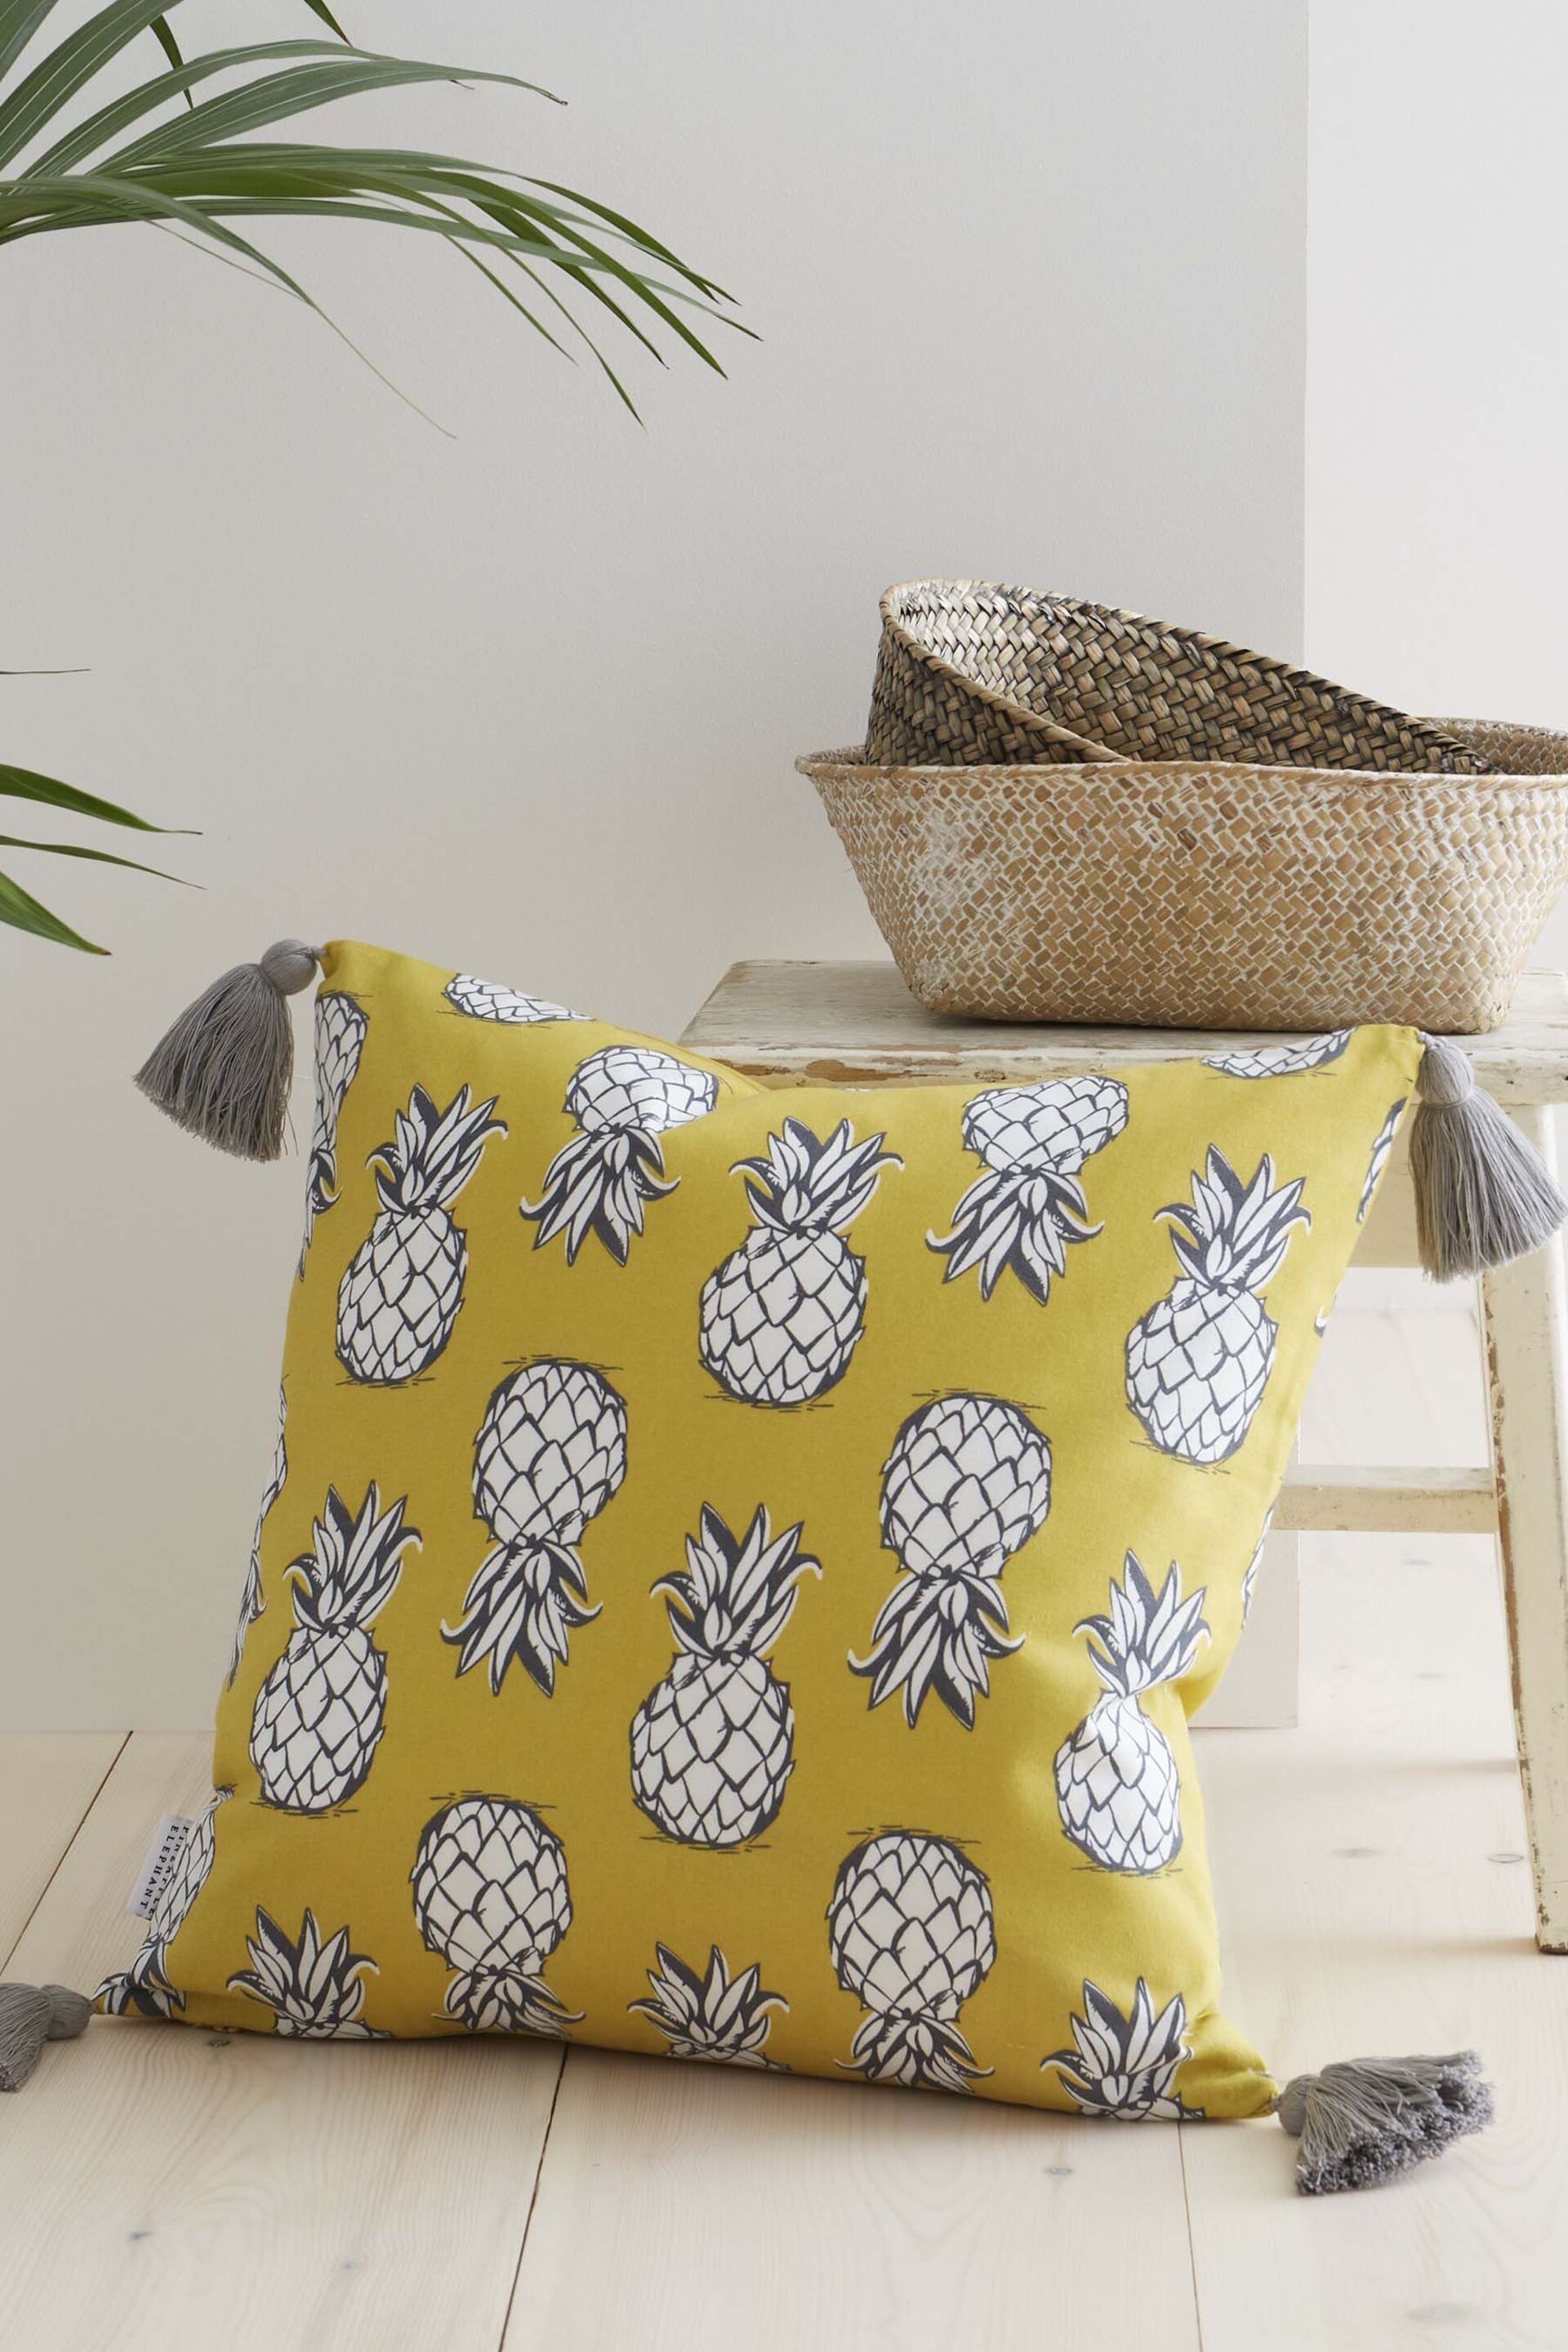 Pineapple Elephant Yellow Tupi Pineapple Outdoor/Indoor Water Resistant Cushion - Image 2 of 5